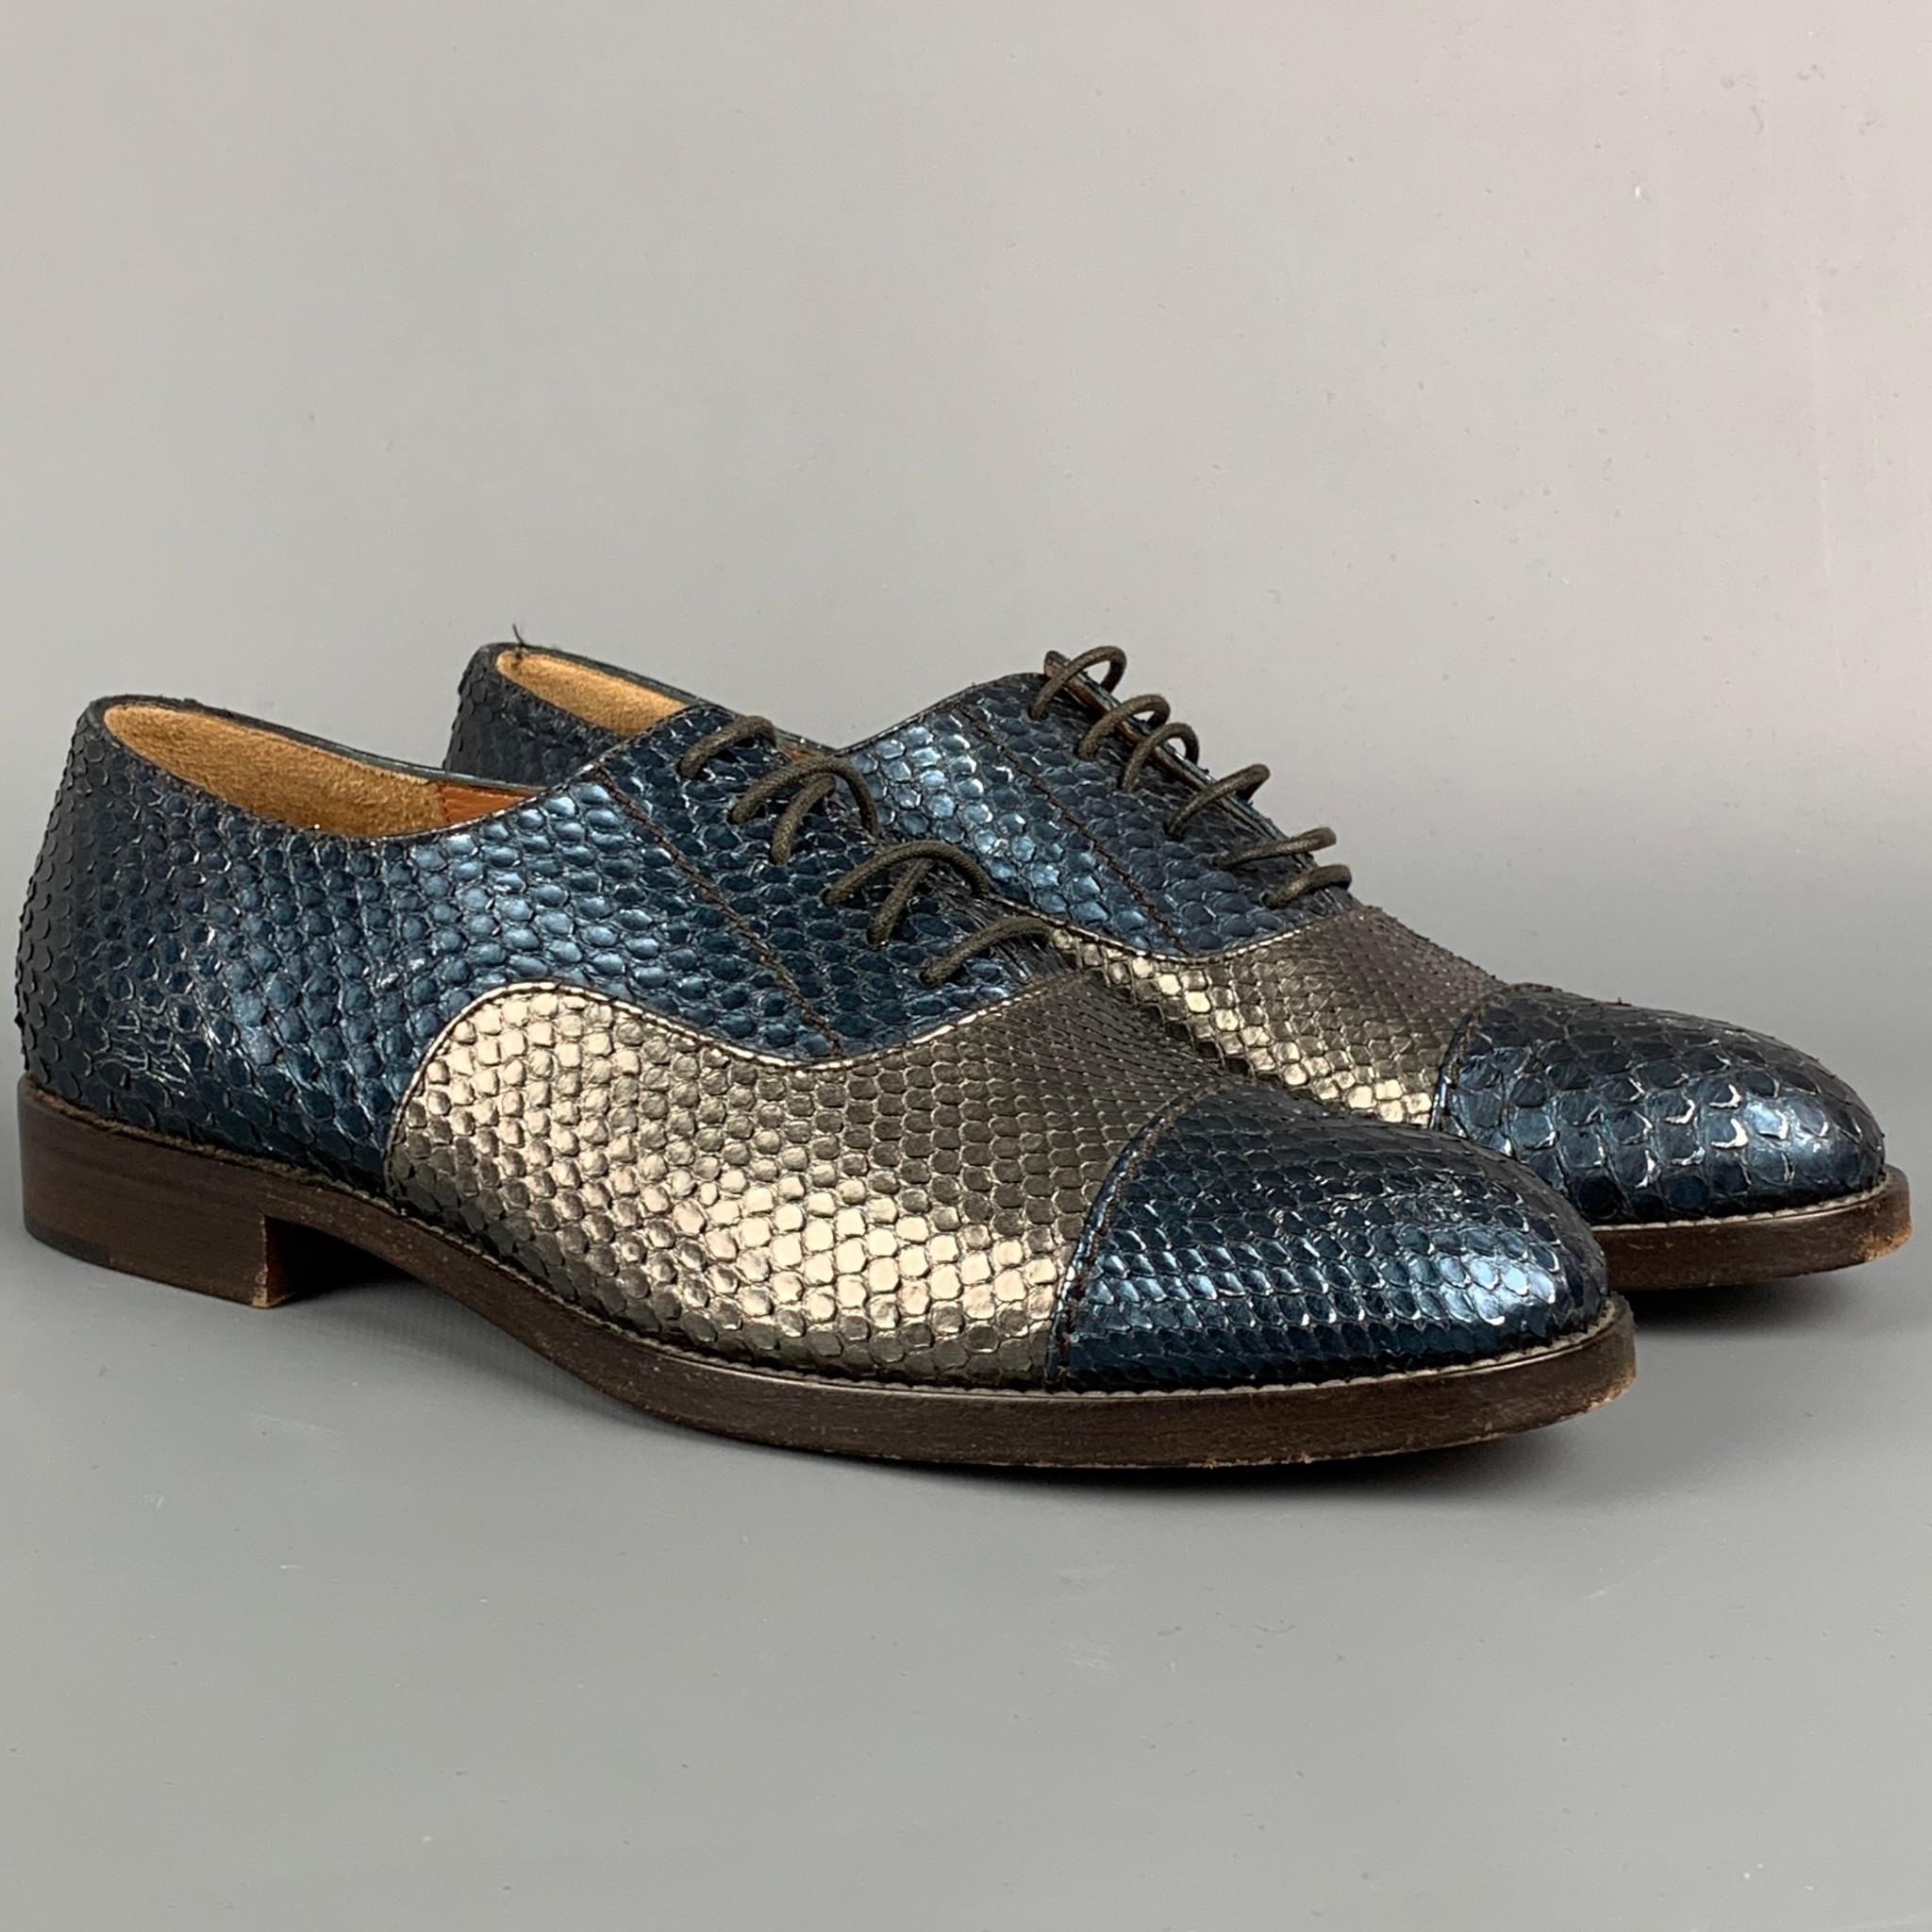 MARC by MARC JACOBS shoes comes in a blue & silver metallic snake skin leather featuring a cap toe and a lace up closure. Made in Italy. 

Very Good Pre-Owned Condition.
Marked: 39

Outsole: 11 in. x 3.5 in. 